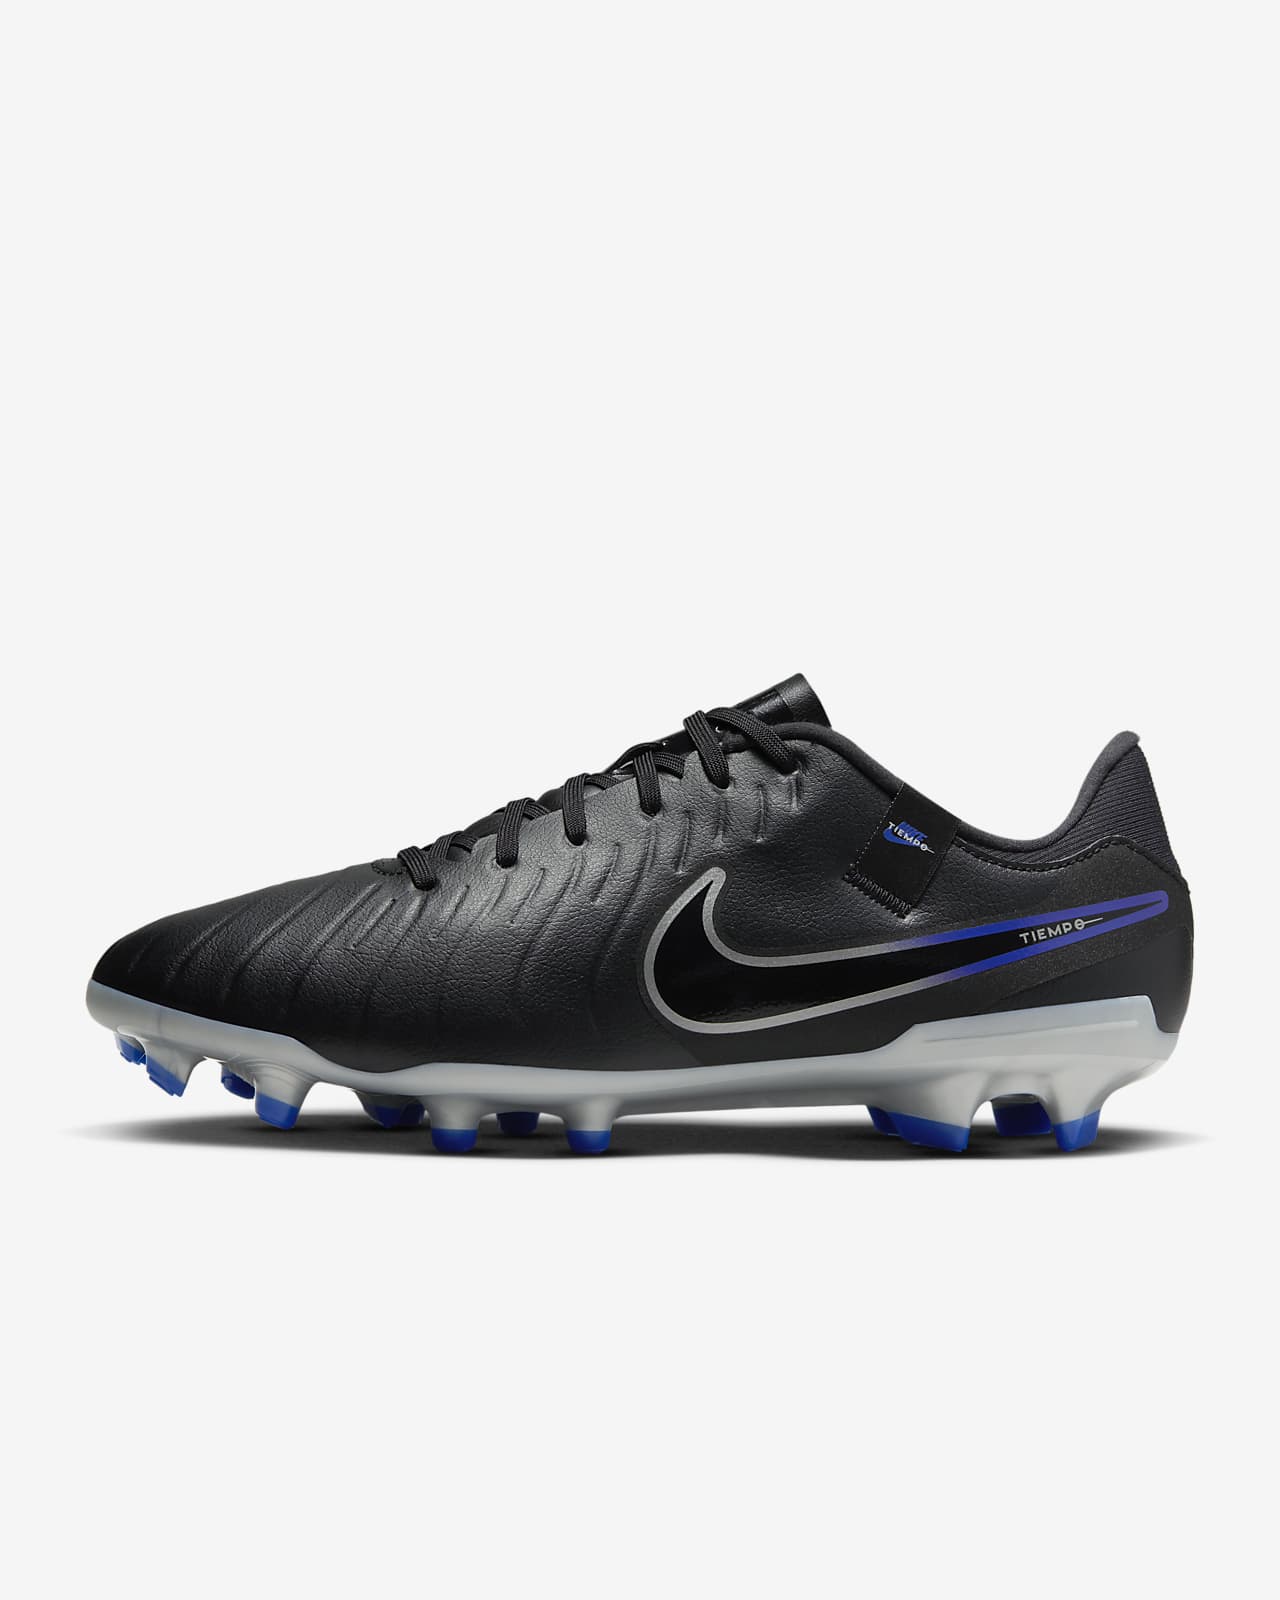 Nike Tiempo Legend 10 Academy Multi-Ground Low-Top Soccer Cleats